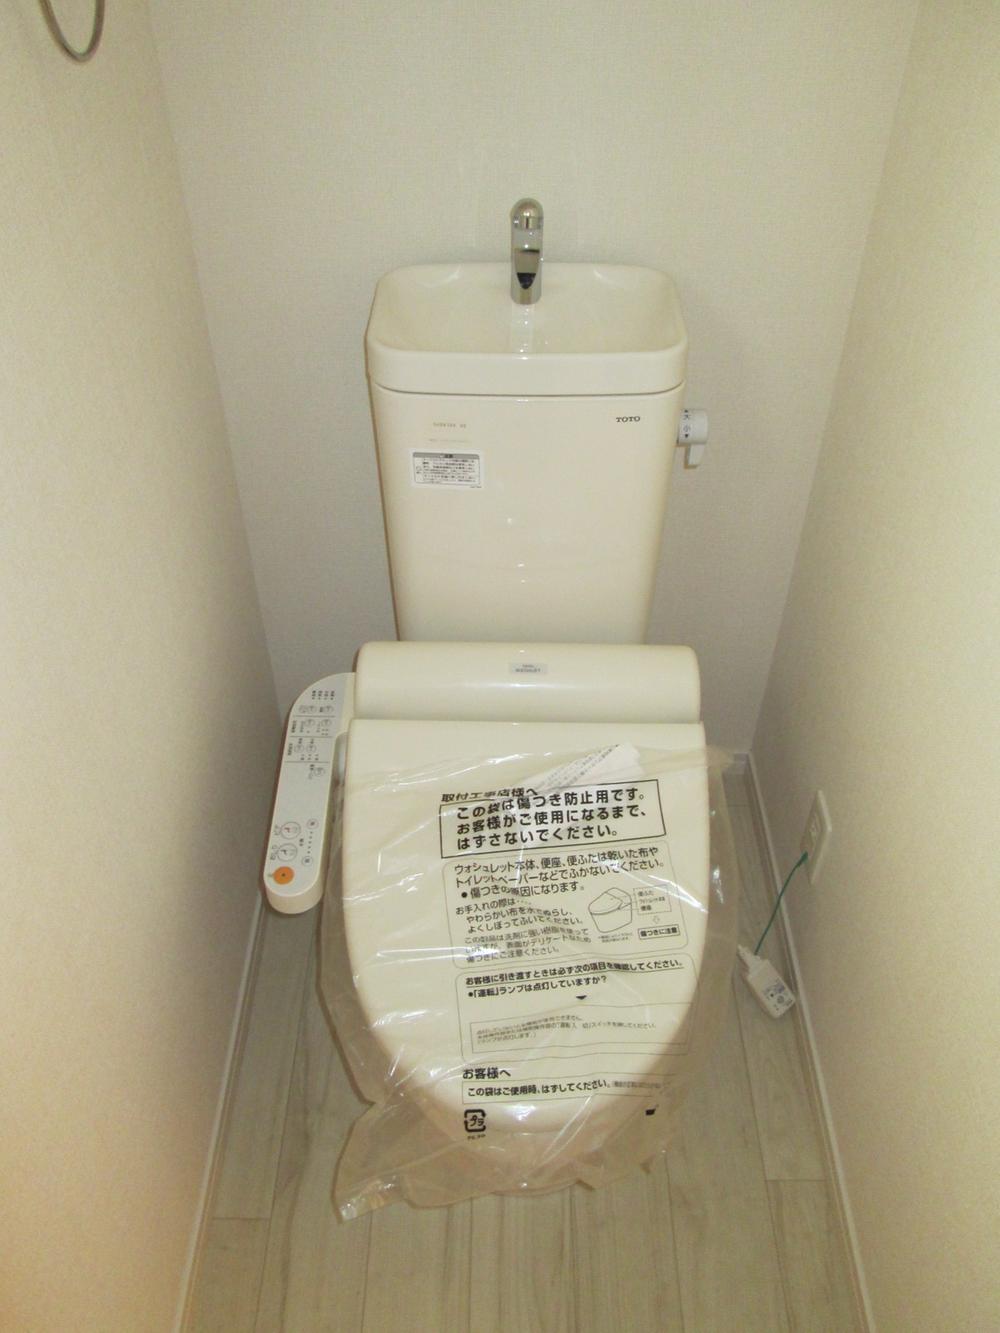 Toilet. It is a functional toilet.